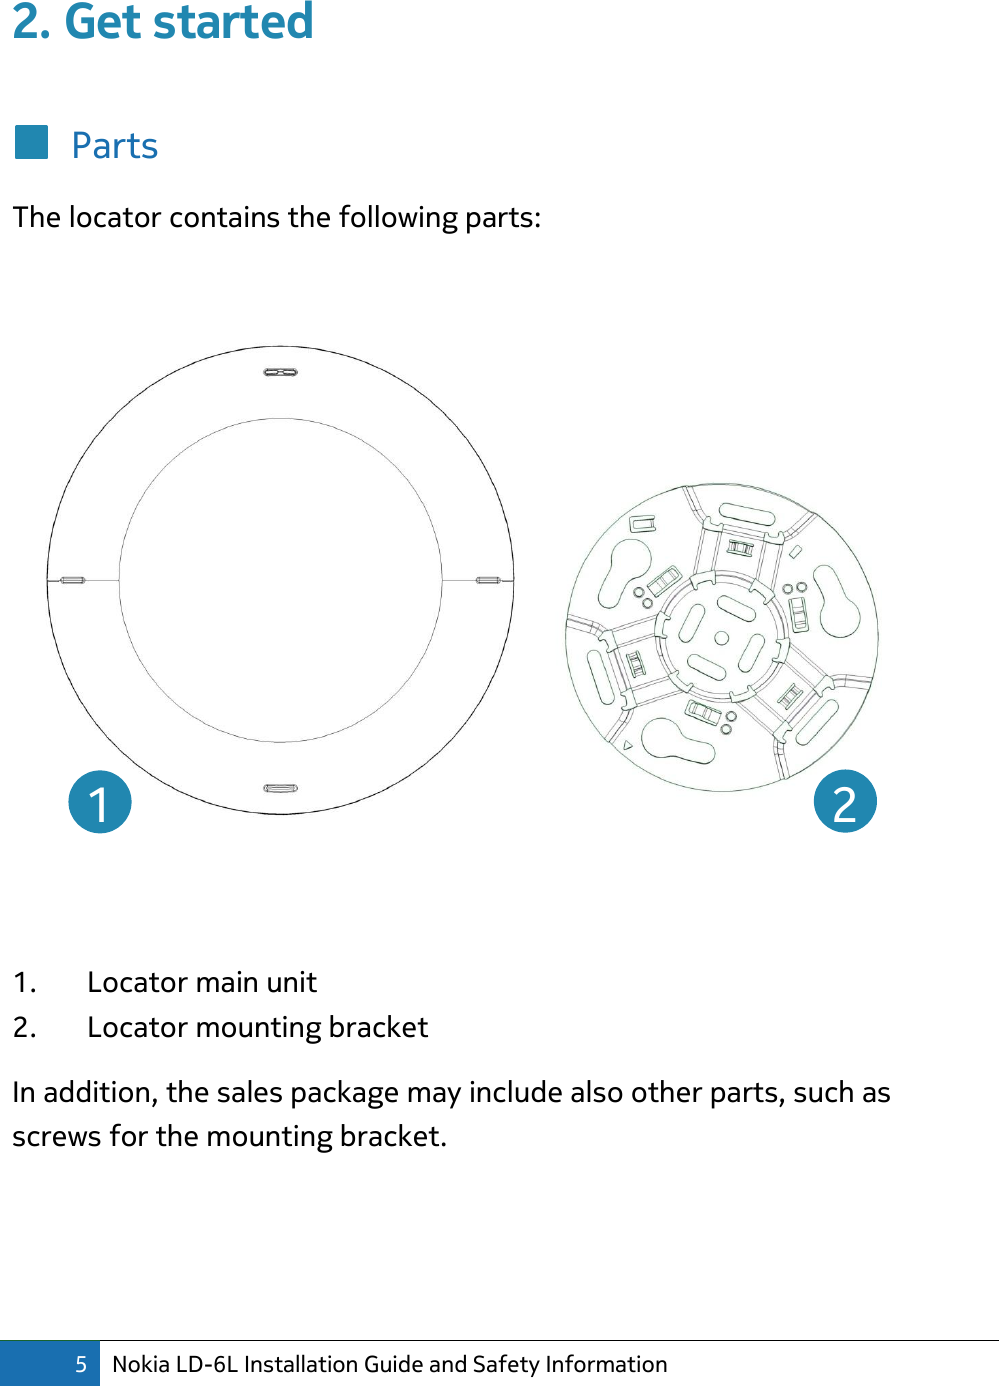 5 Nokia LD-6L Installation Guide and Safety Information  2. Get started  Parts The locator contains the following parts:    1. Locator main unit 2. Locator mounting bracket In addition, the sales package may include also other parts, such as screws for the mounting bracket.    1  2 